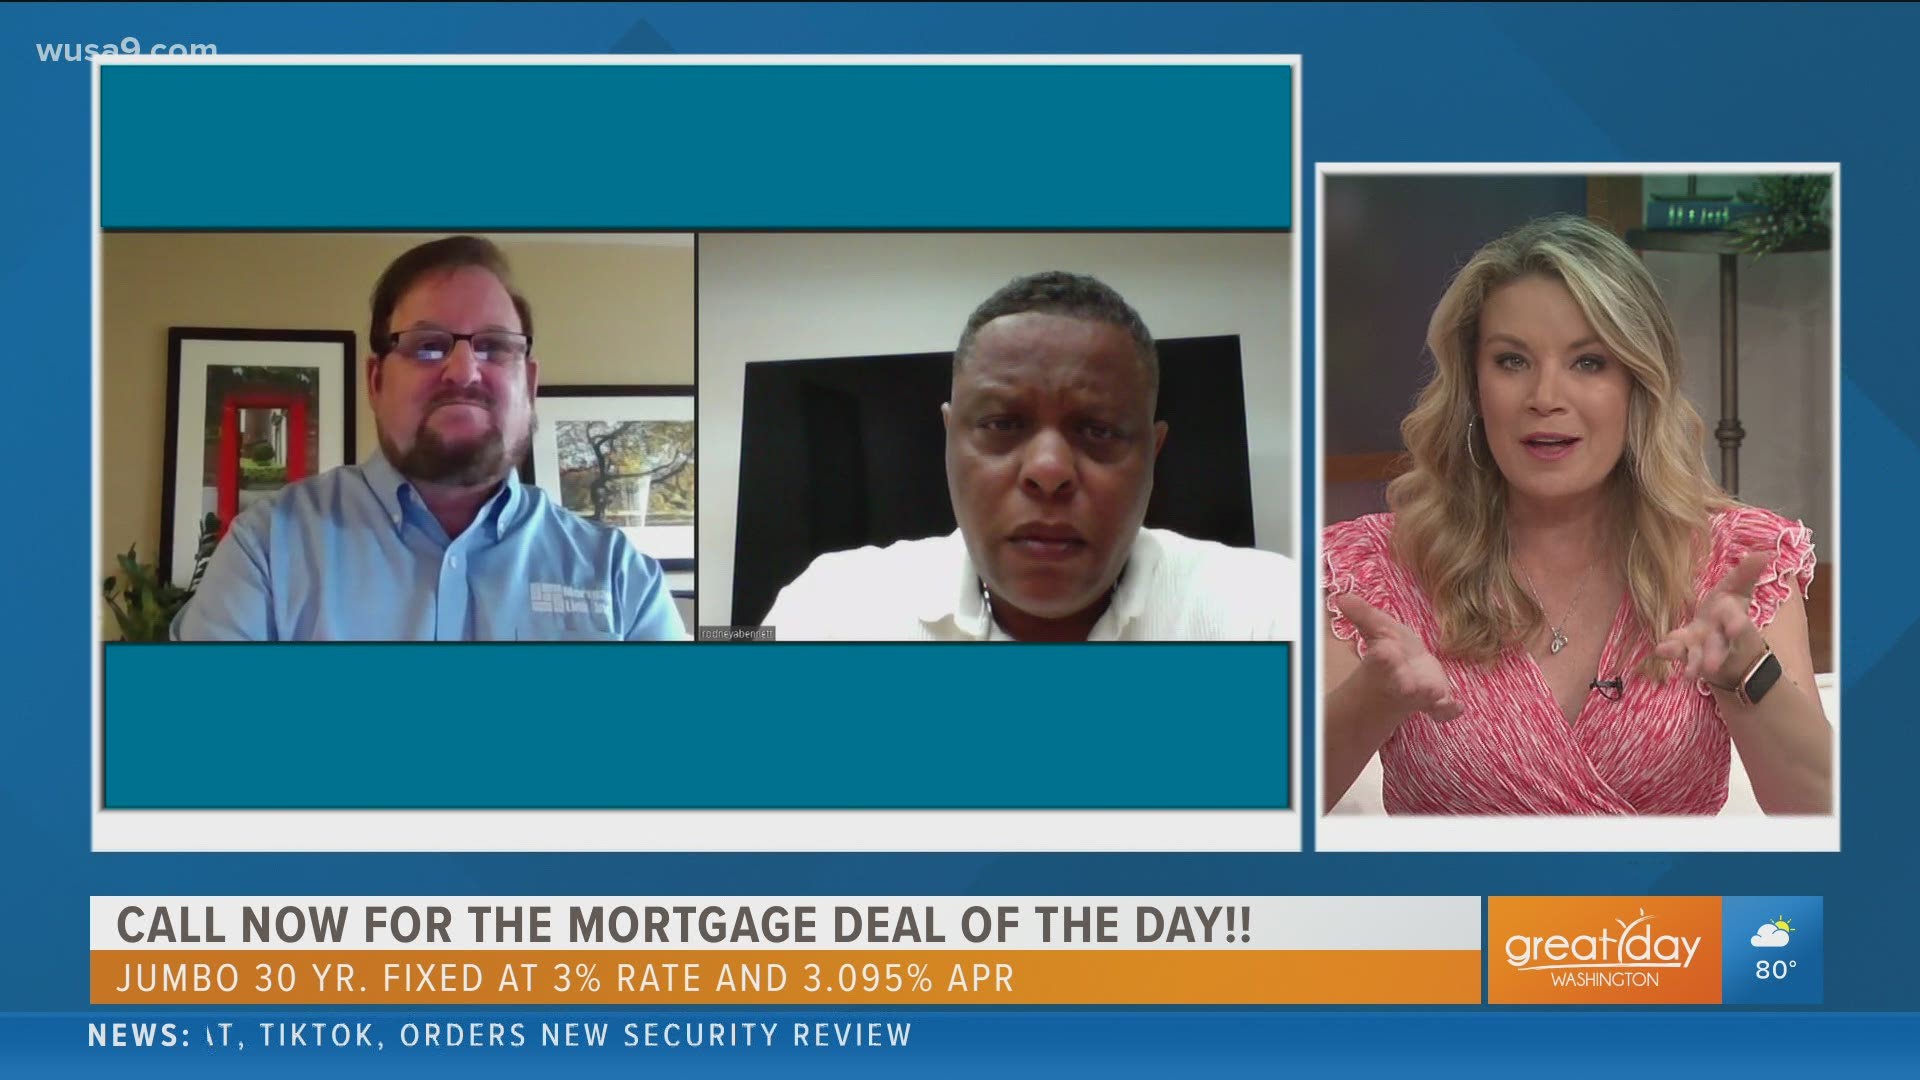 Real Estate experts Mark Baron and Rodney Bennett want to help you buy a home in this tight market. Sponsors: The Mortgage Link & Eastern Title and Settlement.